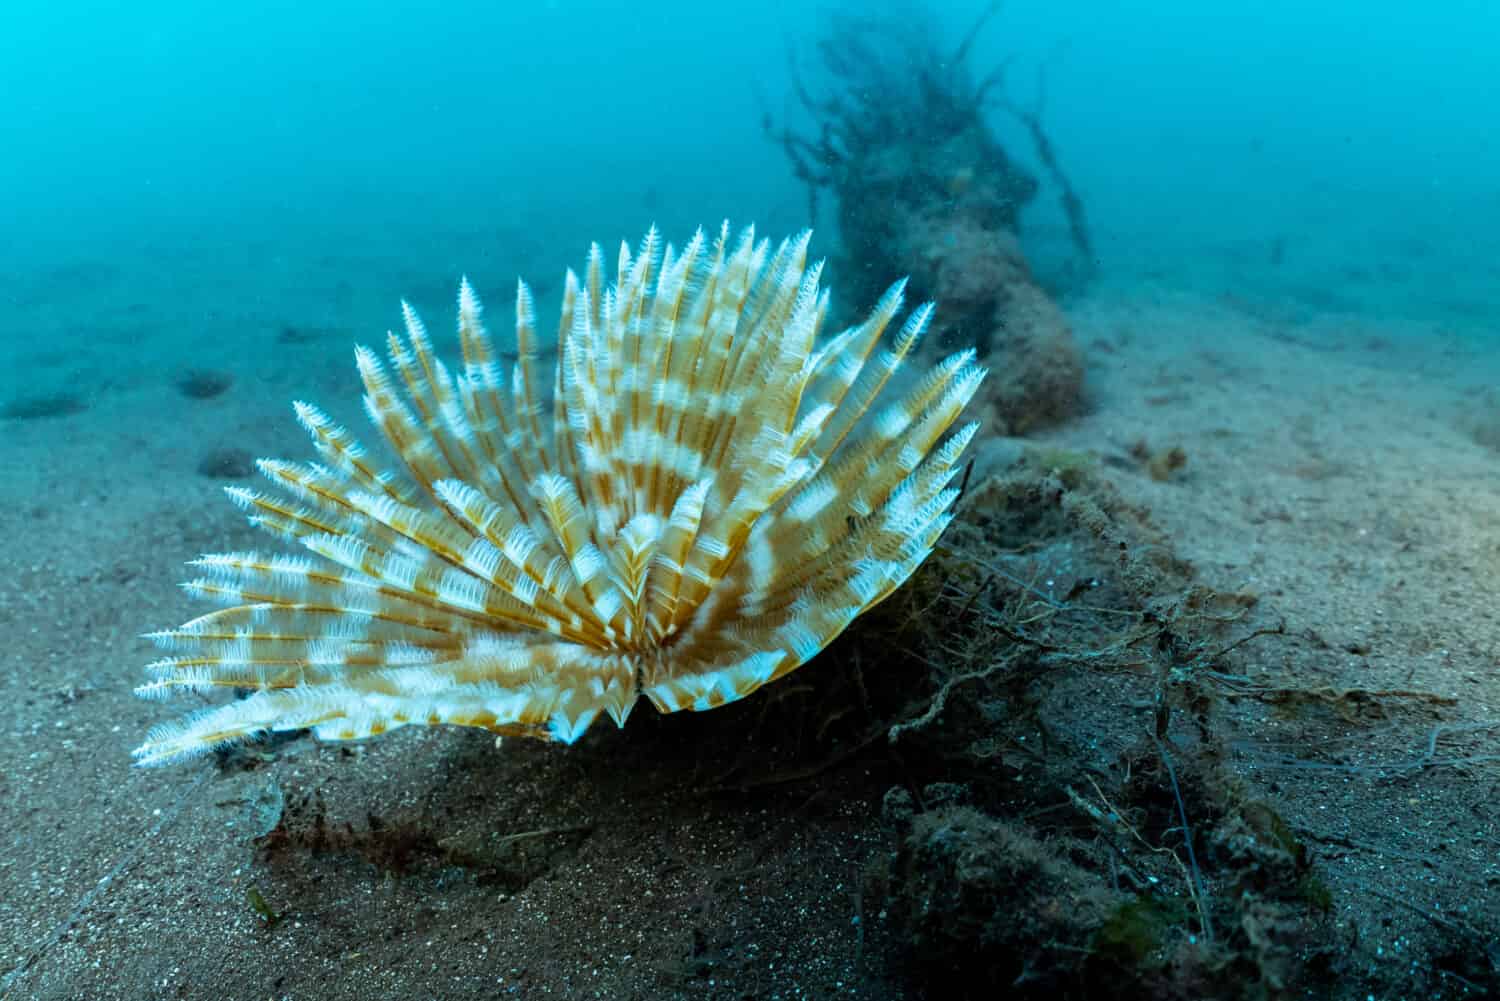 A feather duster worm, Sabellastarte spectabilis, sits with its tentacles out, on a shallow silty sea floor next to an old encrusted mooring chain.